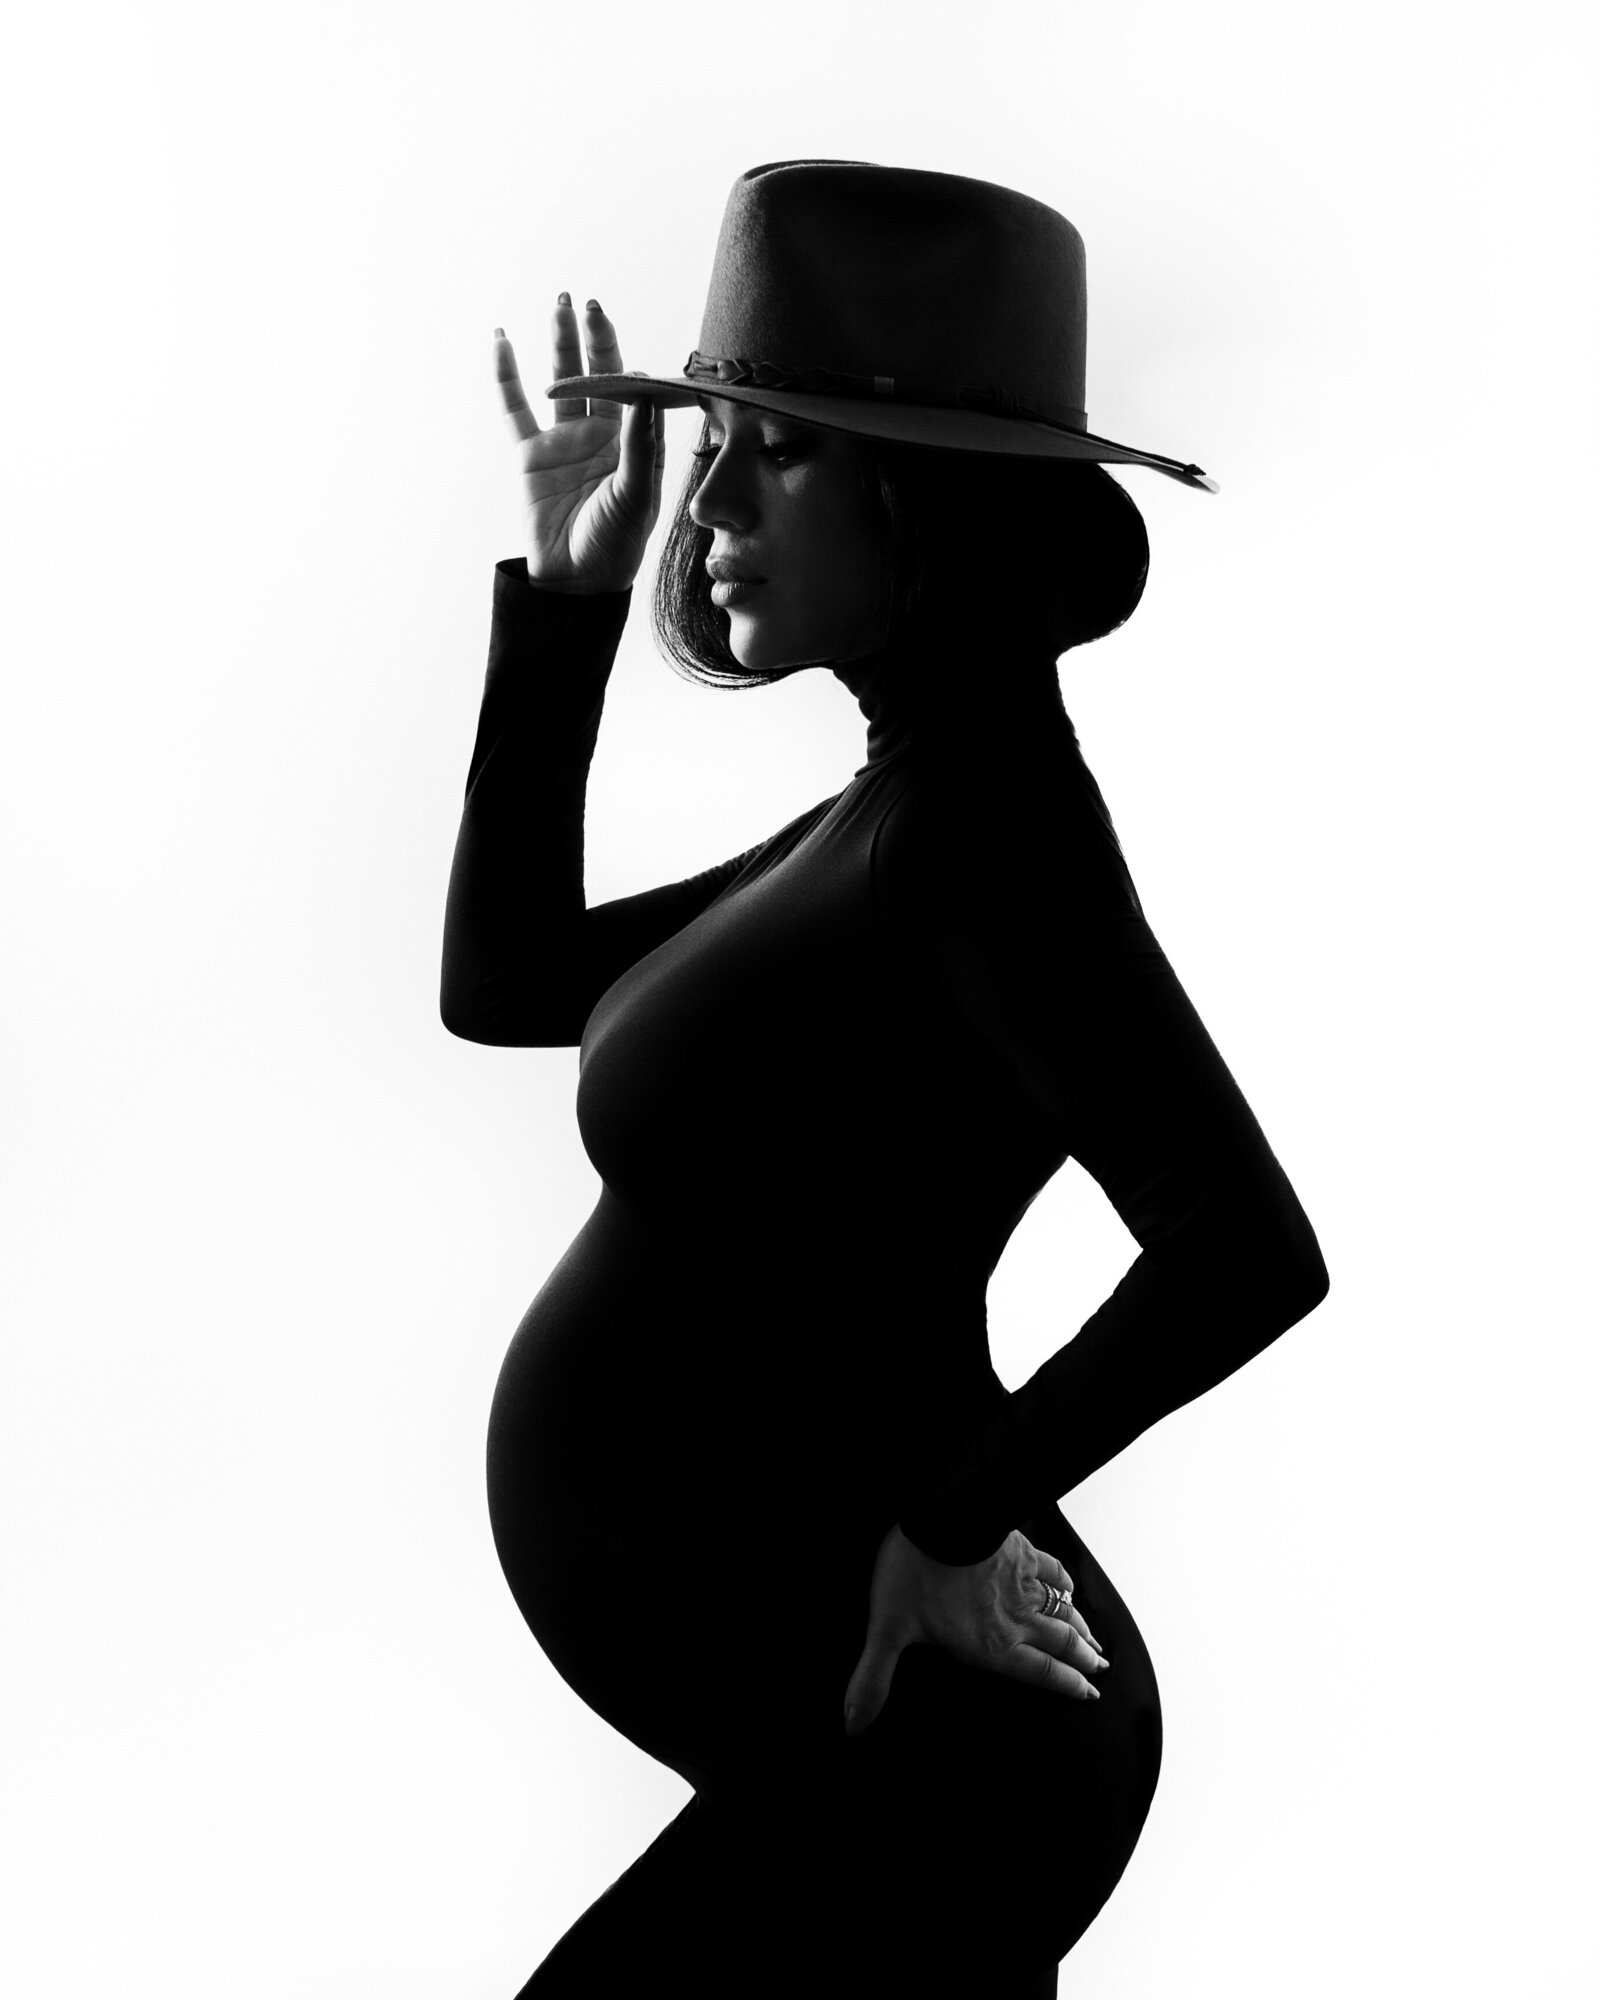 Stunning black and white maternity portrait by Daisy Rey